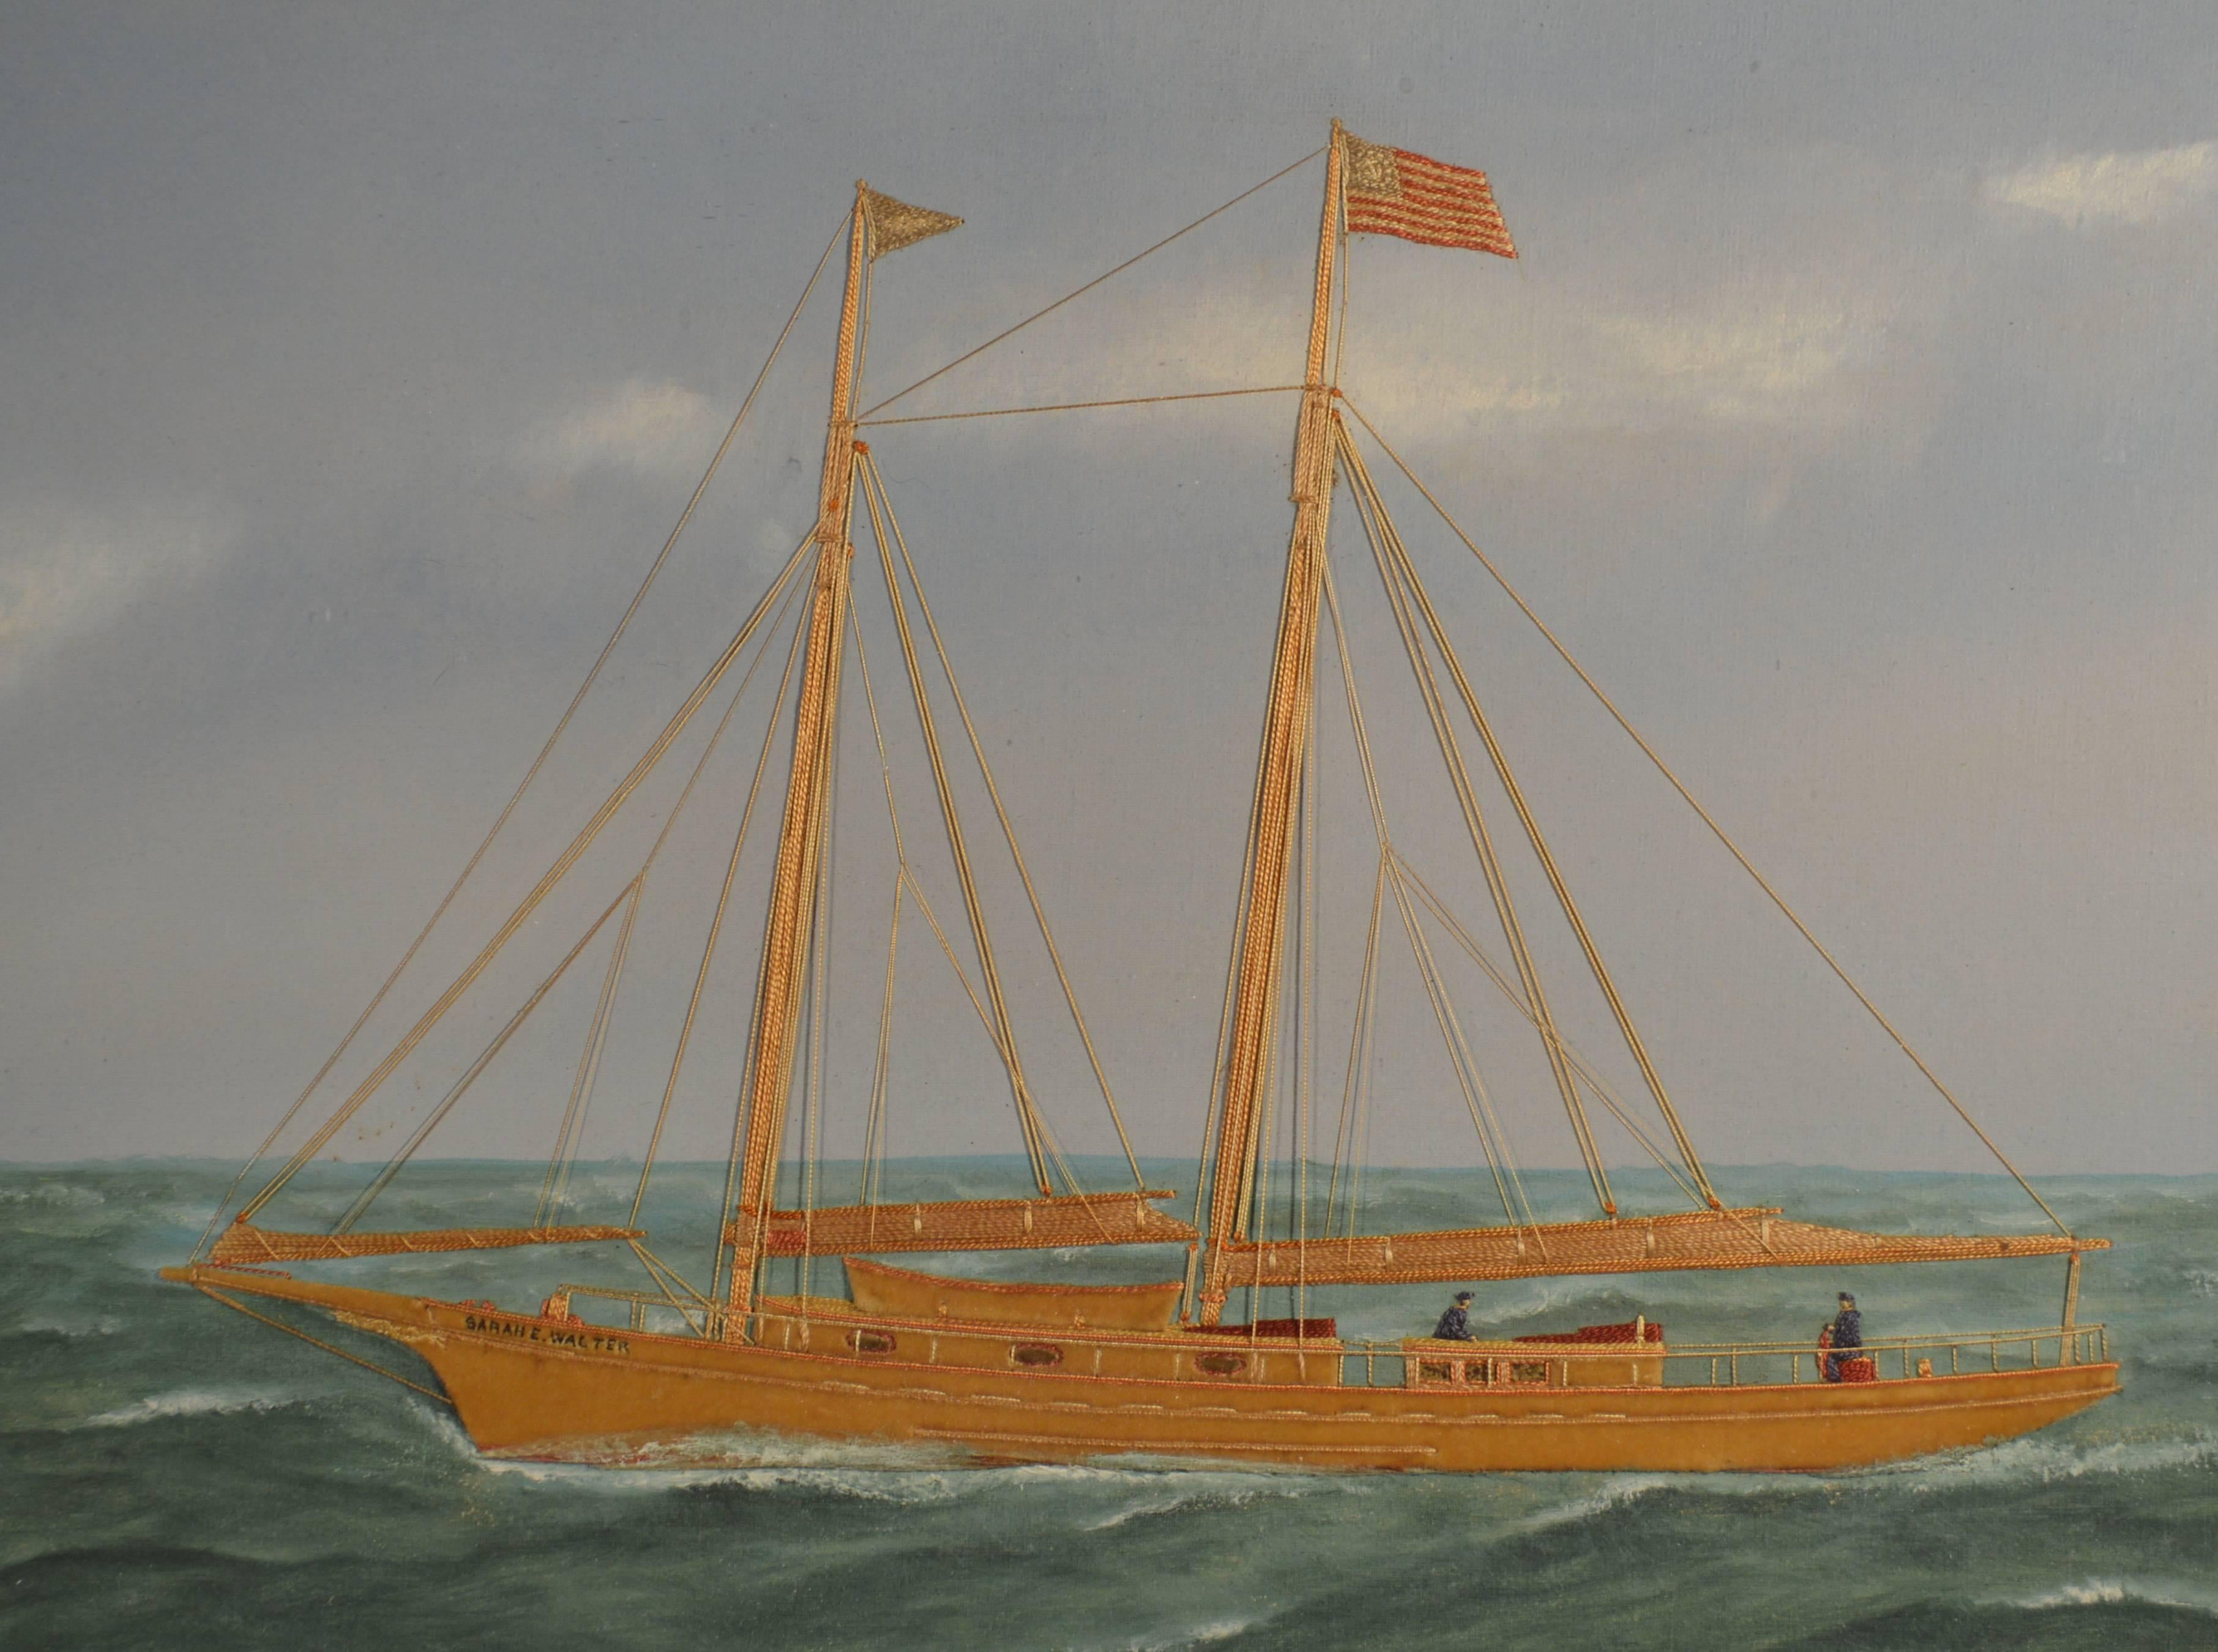 American Thomas Willis Picture of the Two-Masted Schooner, Sarah E. Walters